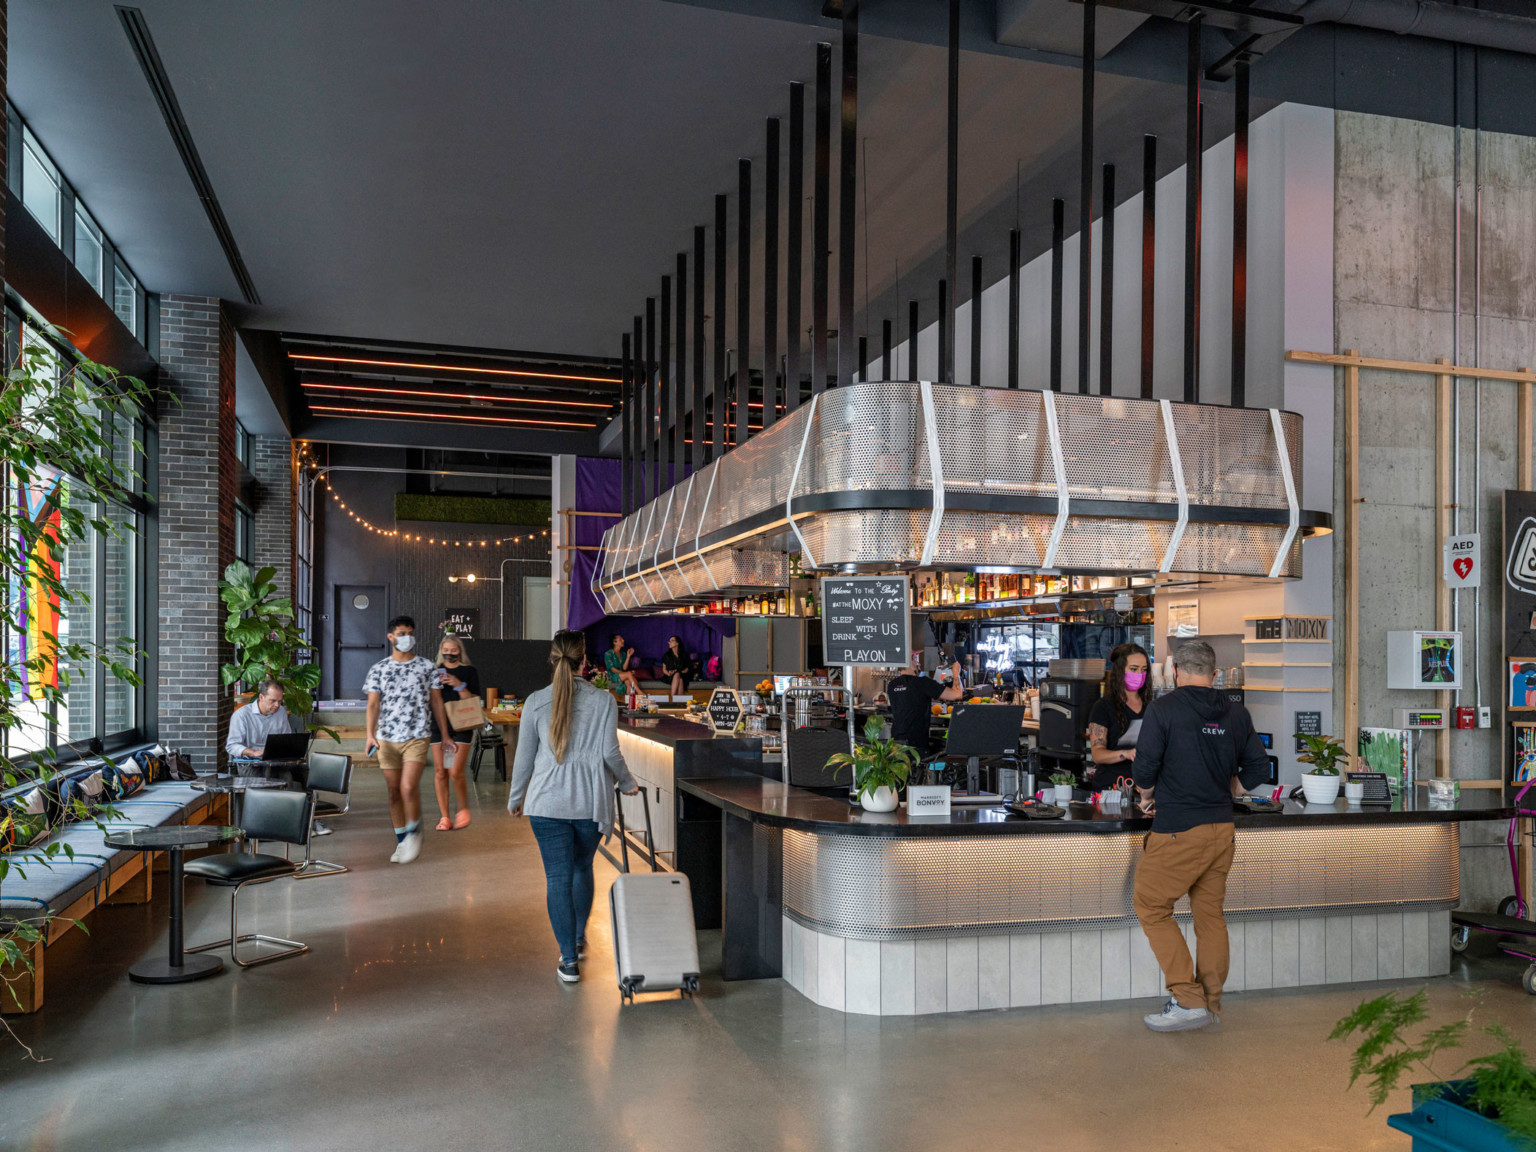 Coffee shop in hotel lobby with white and grey wrap around counter, hanging angular light follows the shape of the counter